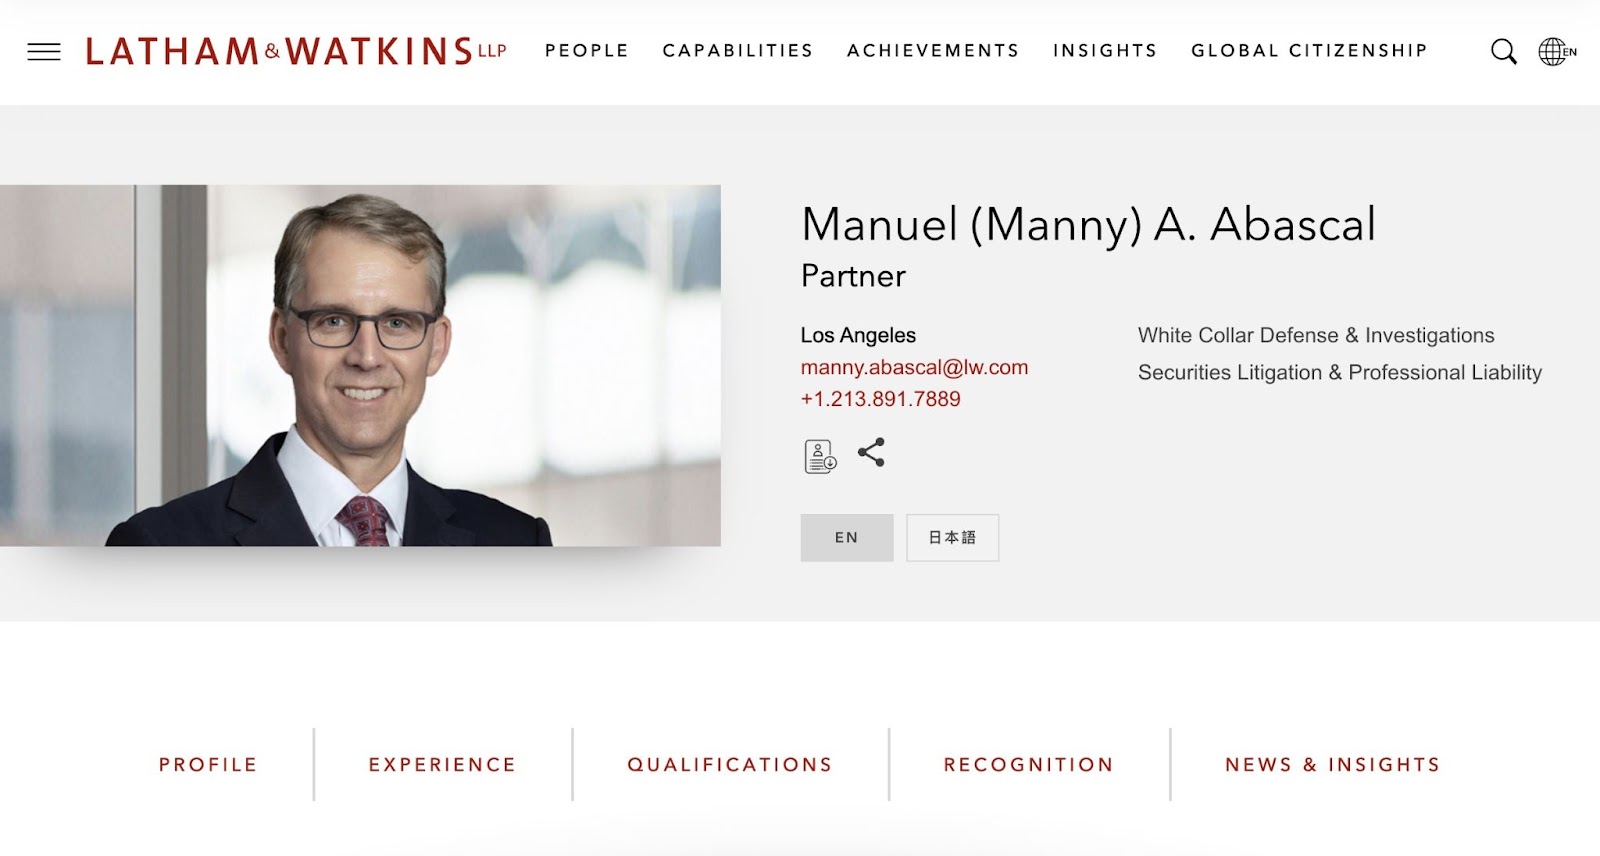 Latham & Watkins' website shows detailed information about its attorneys